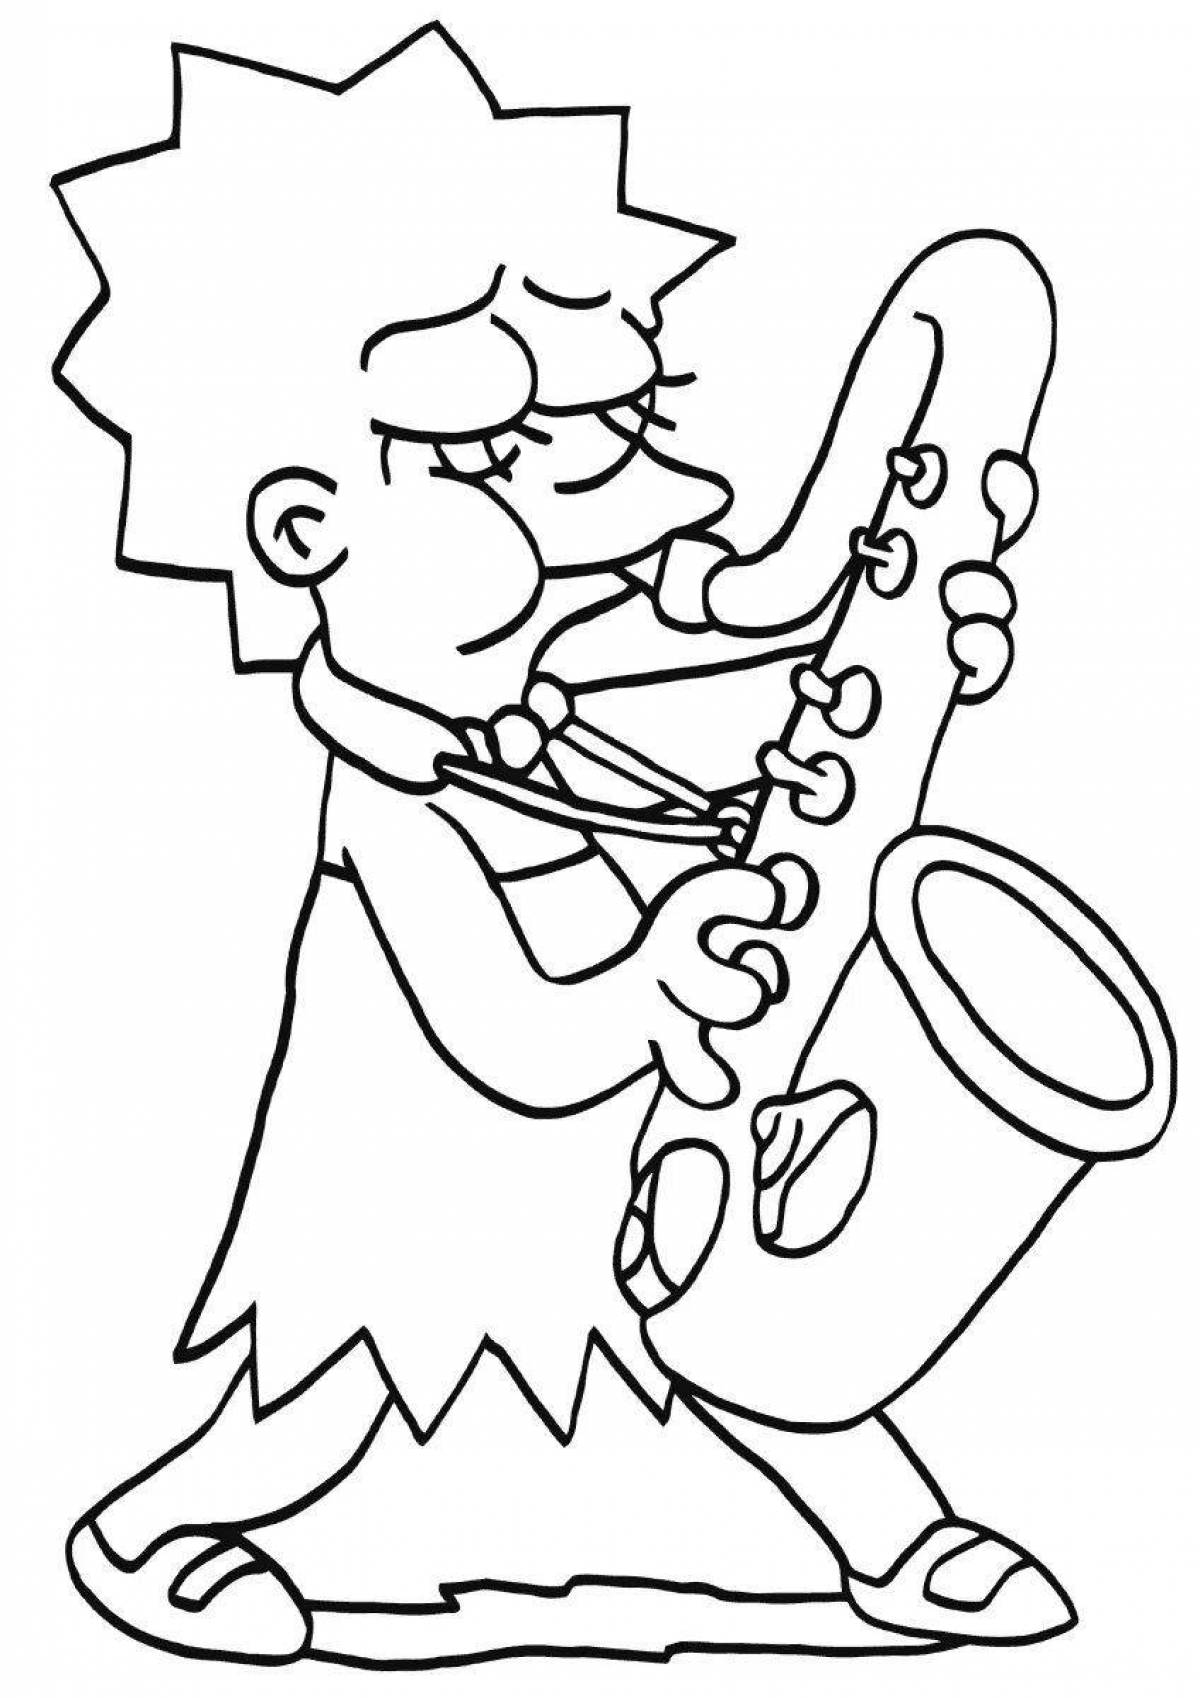 Dynamic saxophone coloring page